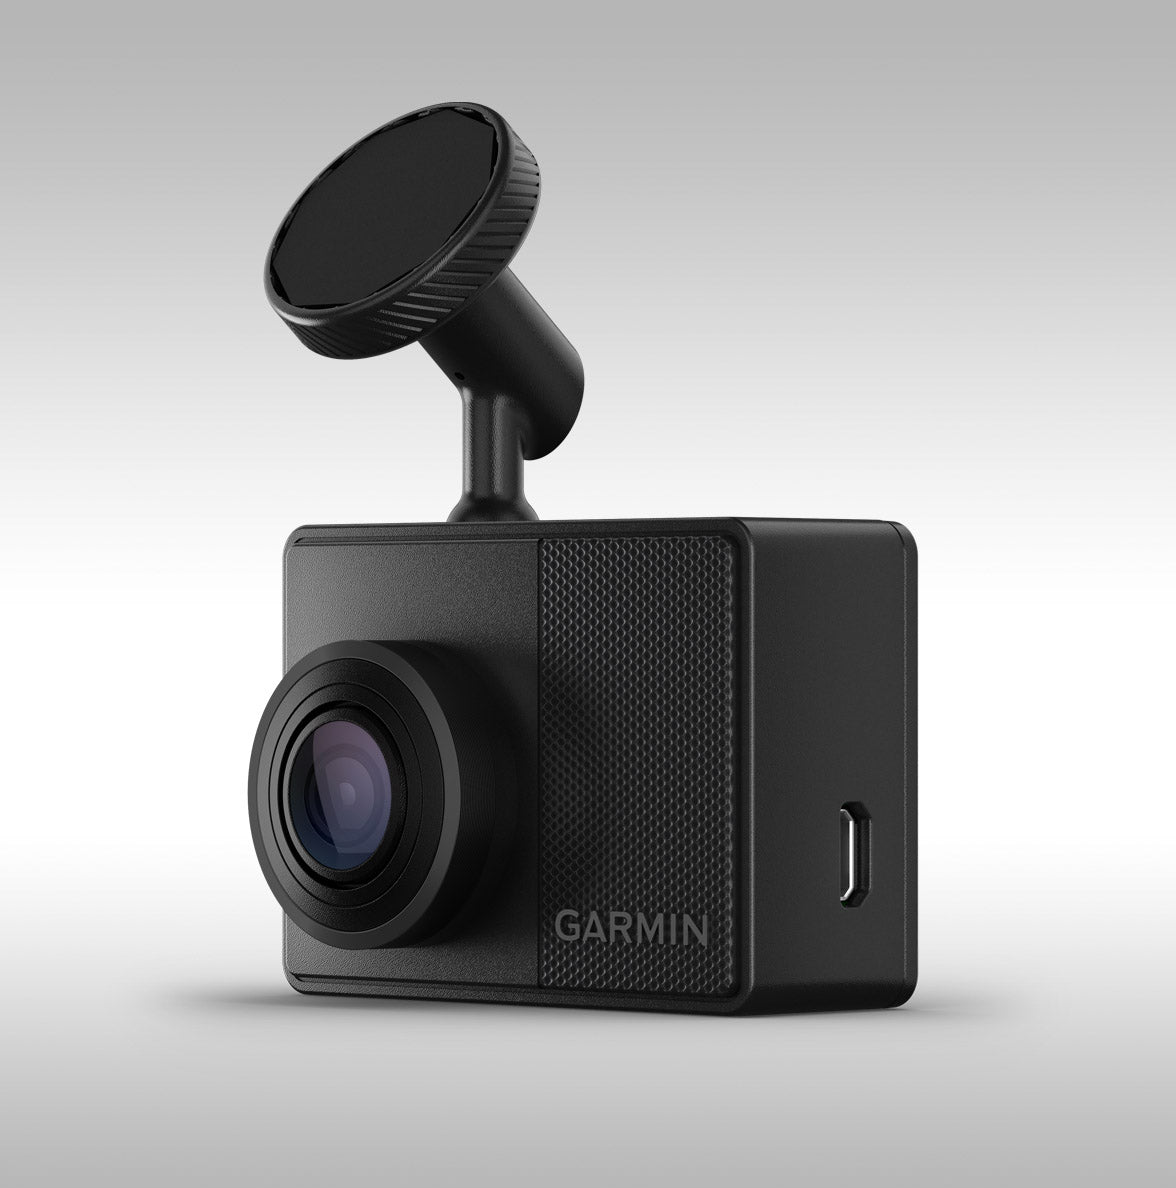 Get this dash cam on sale for under $45